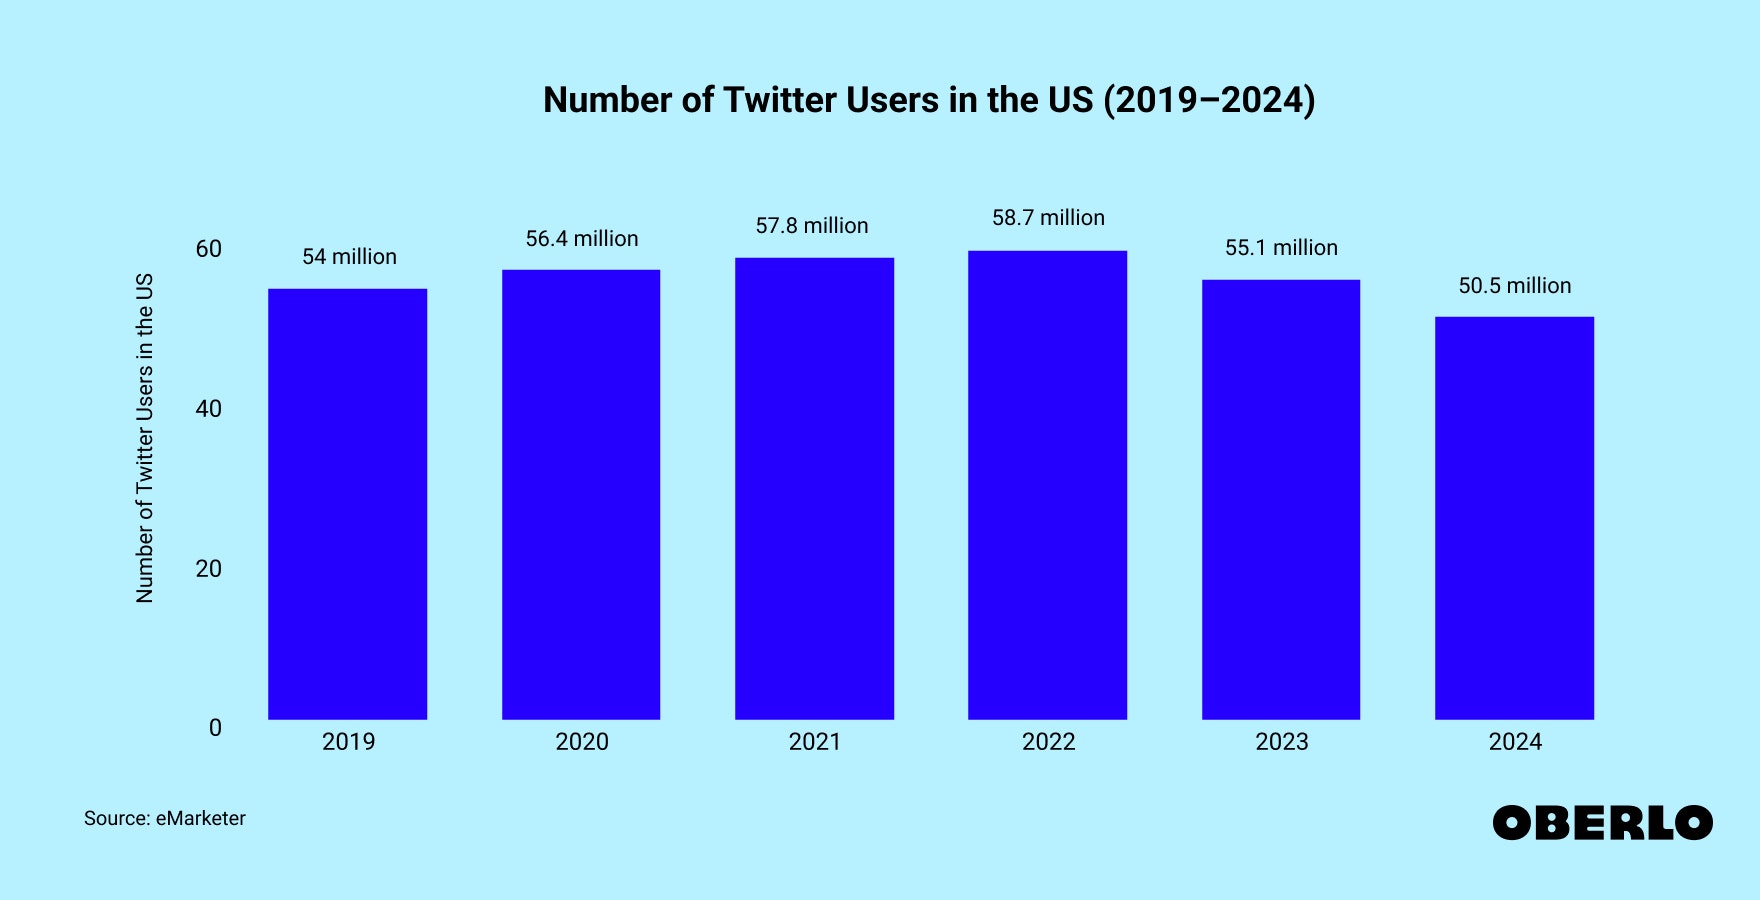 Chart showing: Number of Twitter Users in the US from 2019 to 2024